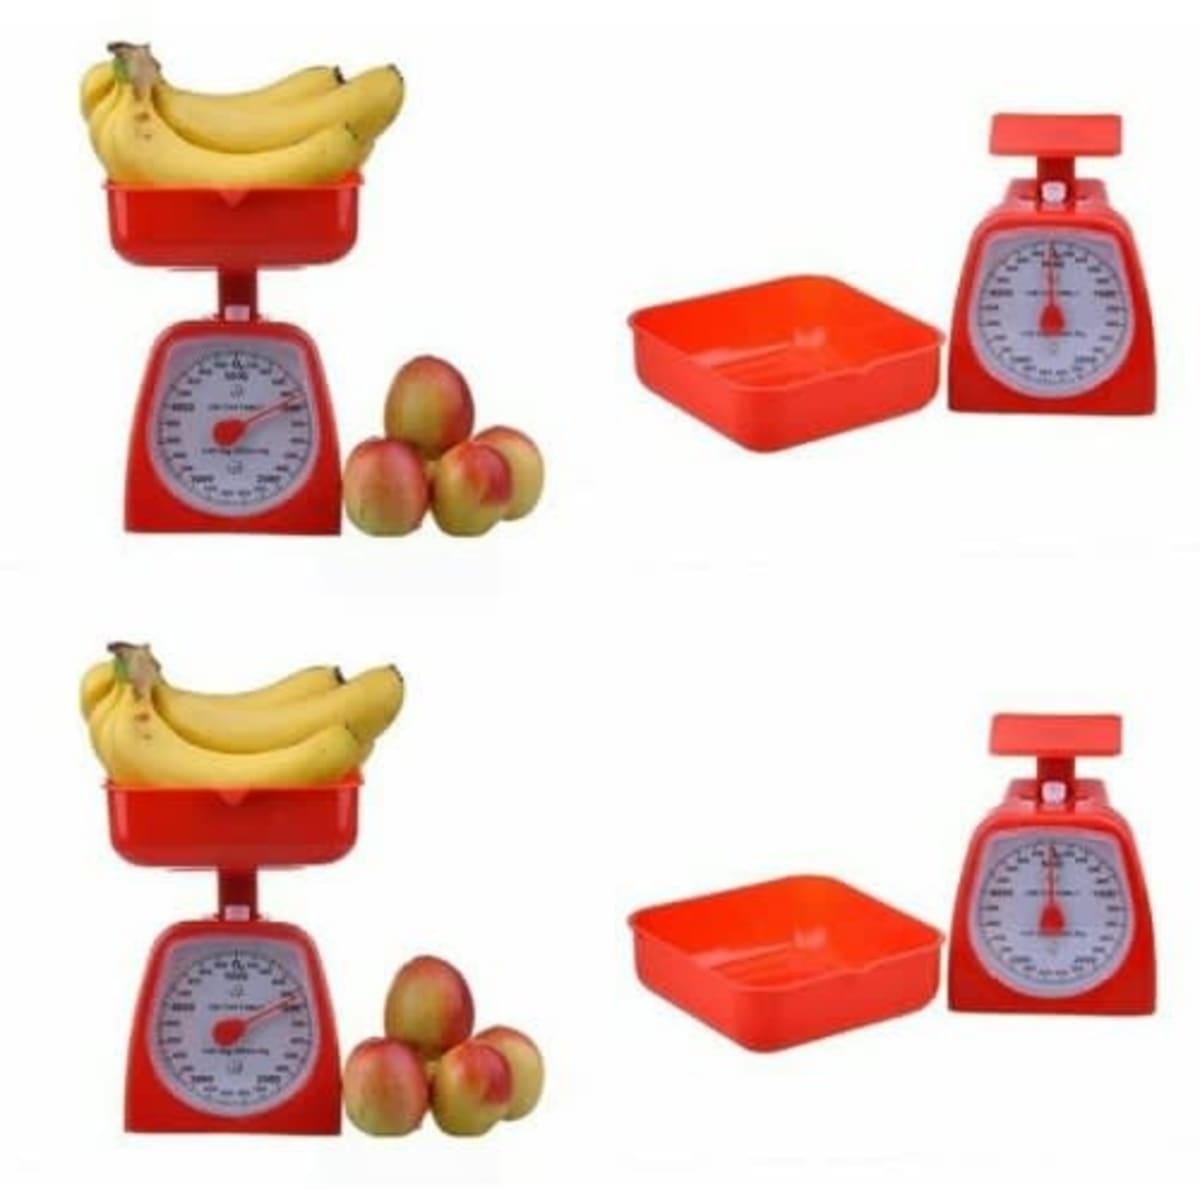 Analog Kitchen Weighing Scale - Red